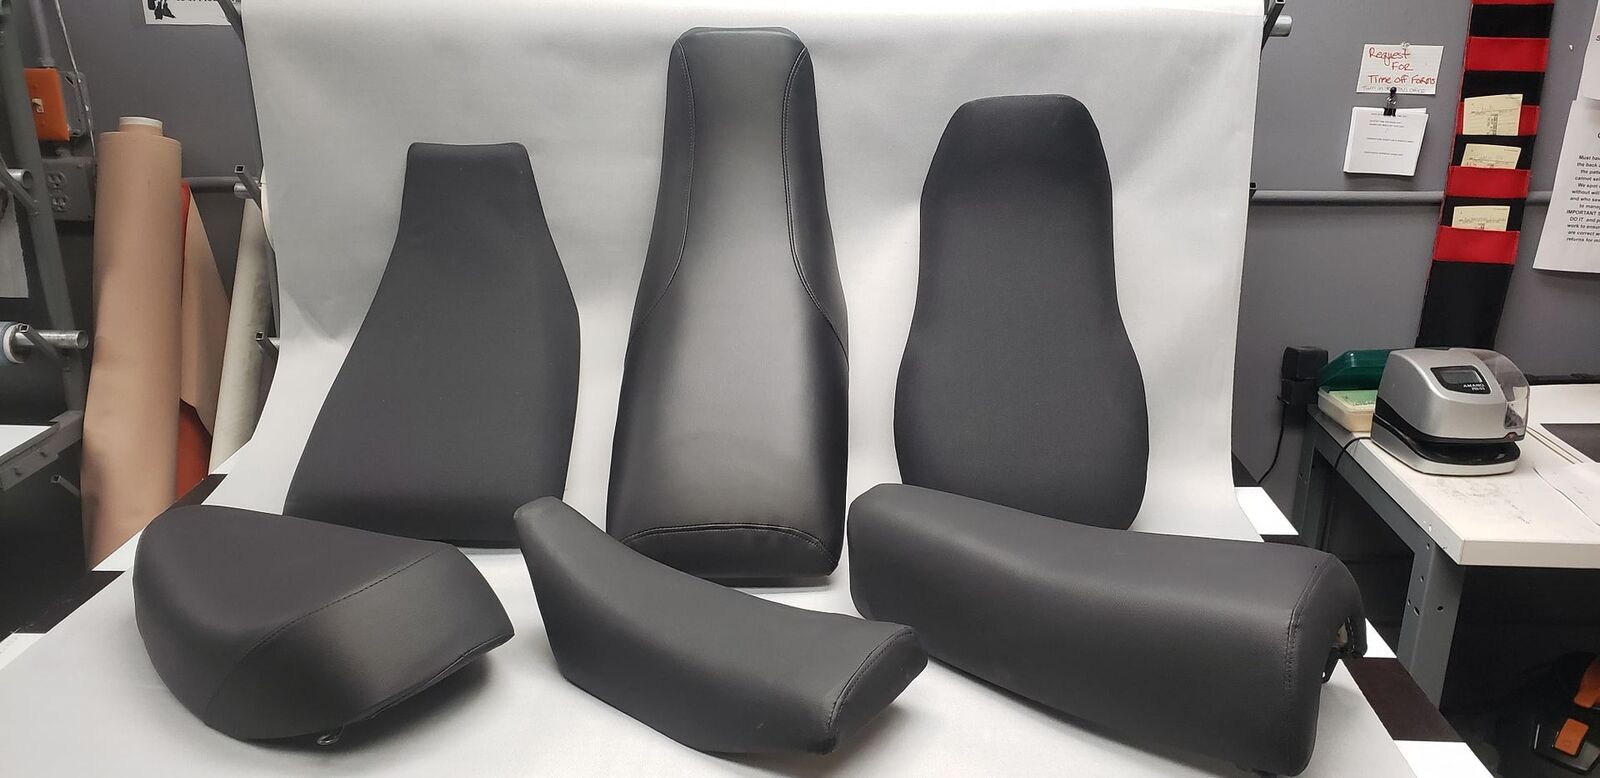 Suzuki DS 80 Seat Cover For 1983 To 1996 Models